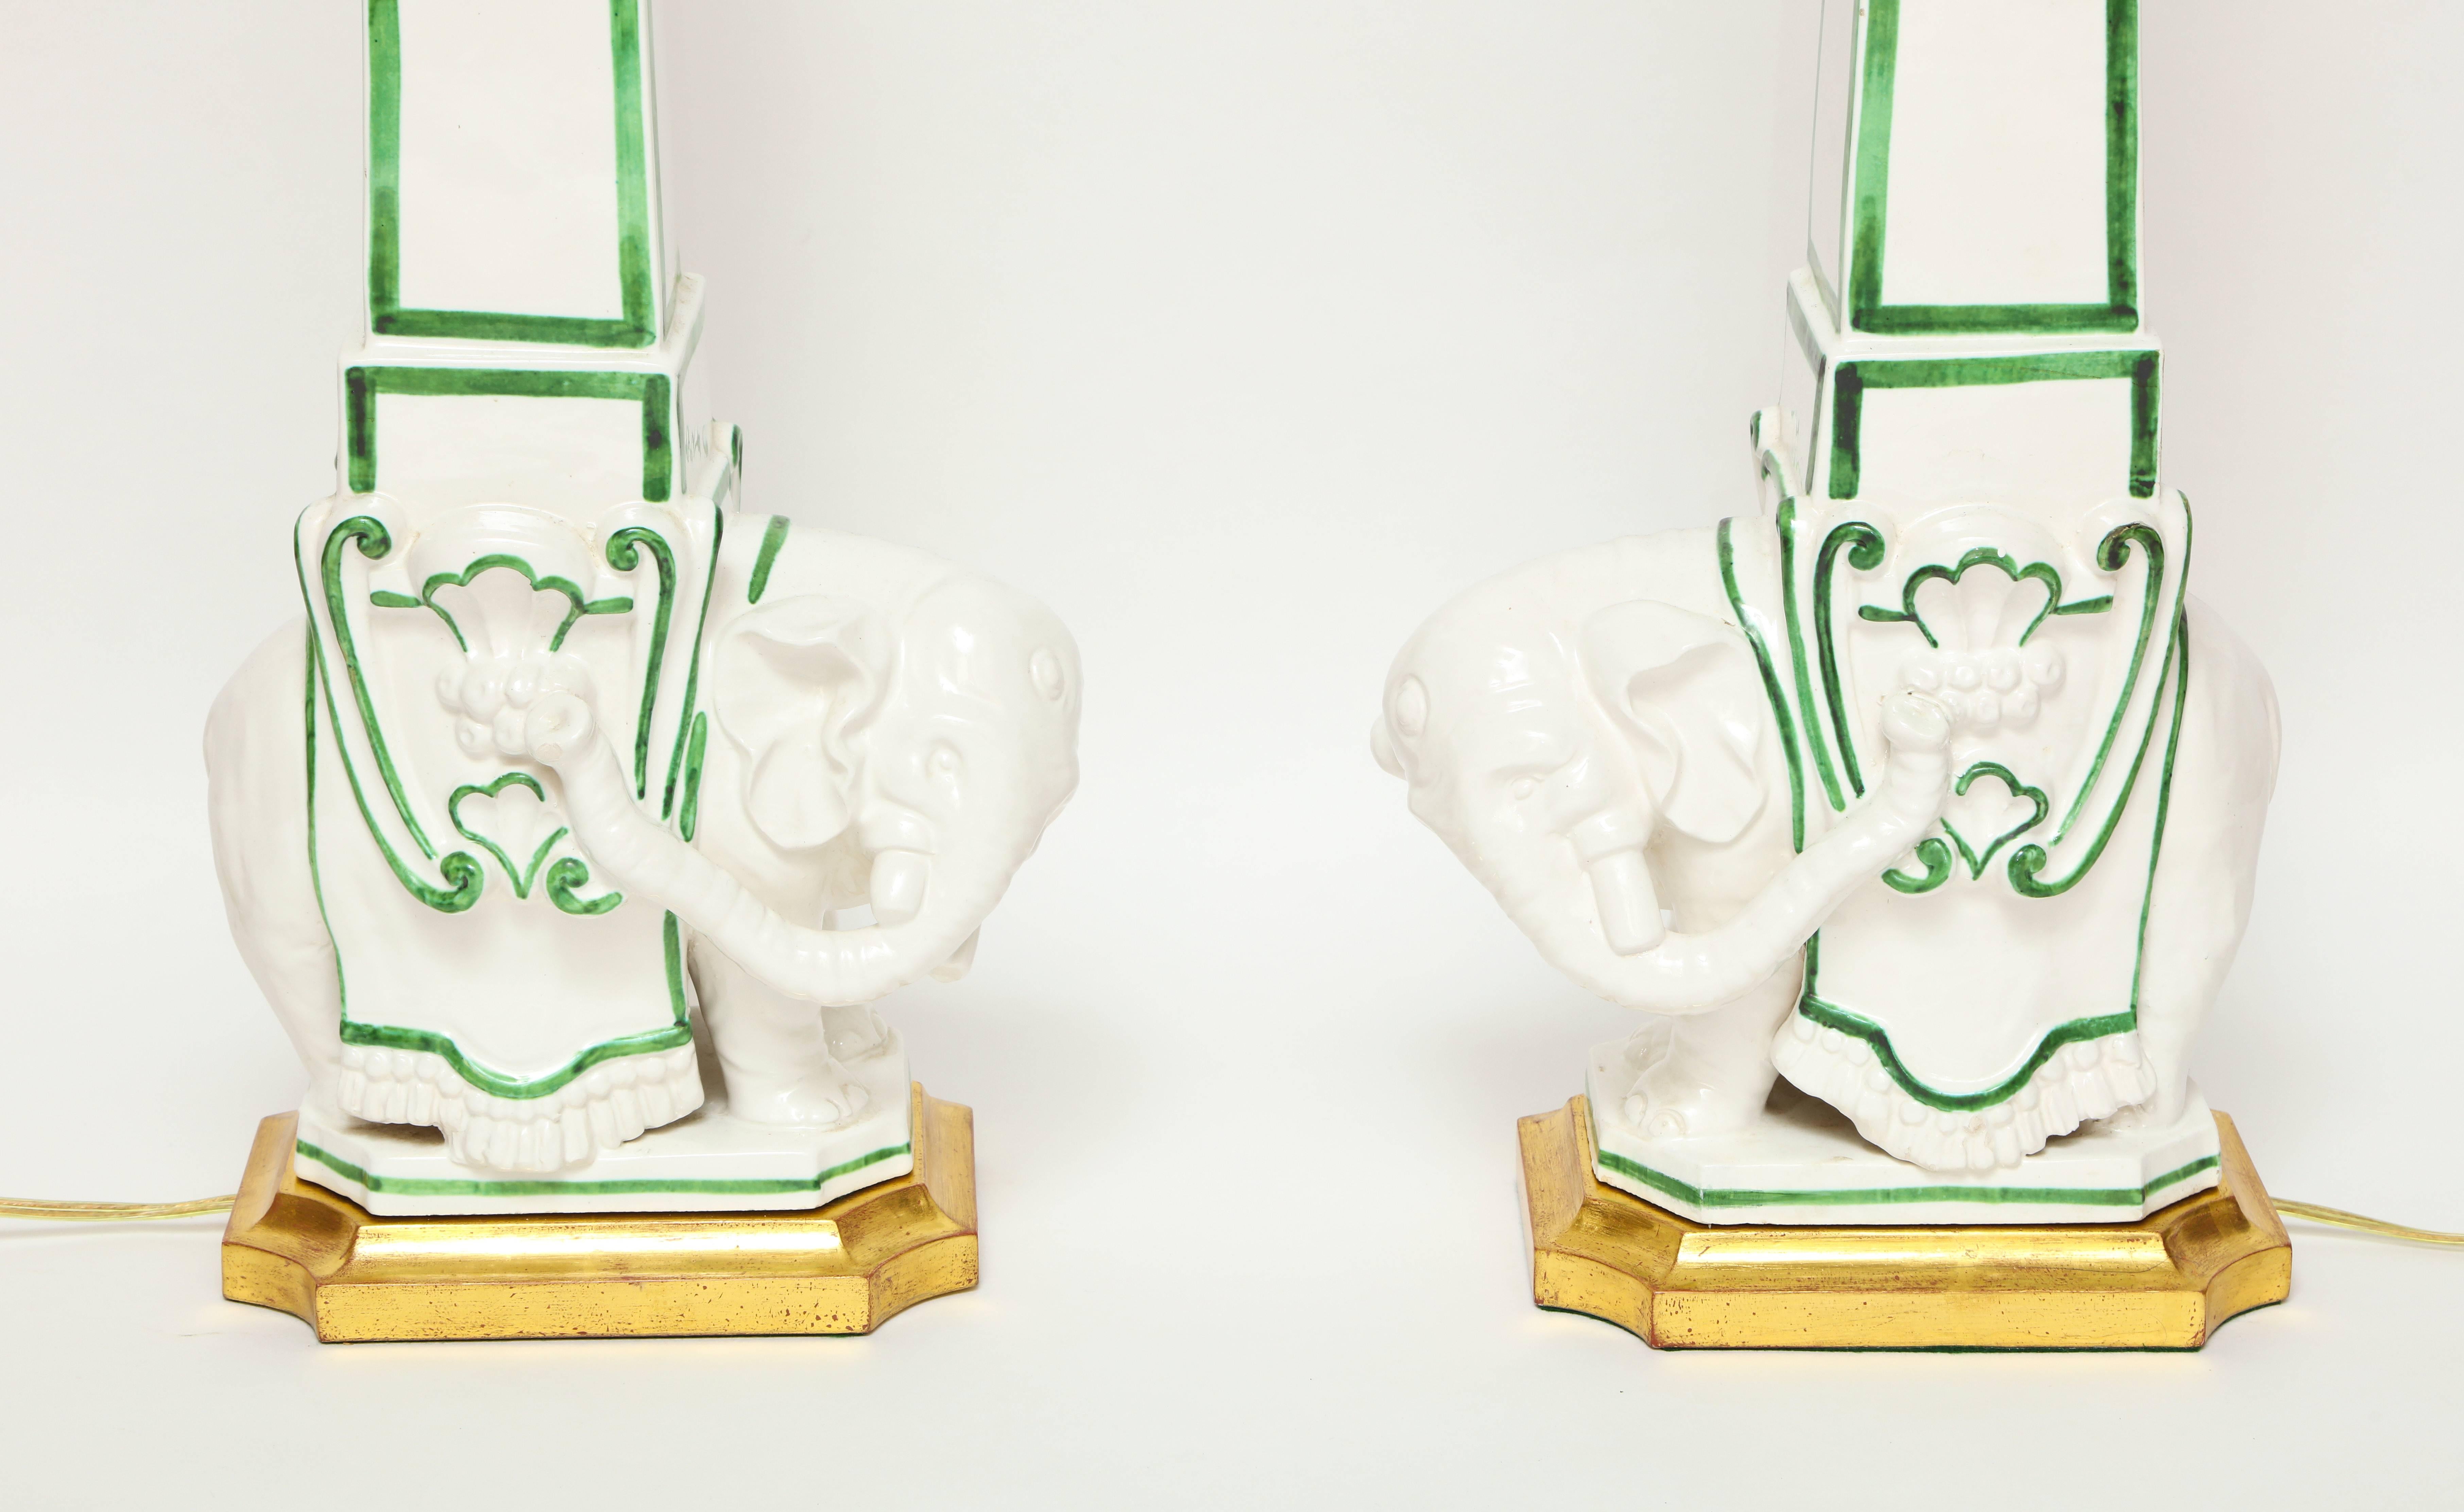 A pair of Italian ceramic table lamps, the model inspired by Bernini and his right and left facing elephants with up-swept trunks and obelisk. The white porcelain finish is decorated with green striping on each lamp with original artichoke finial